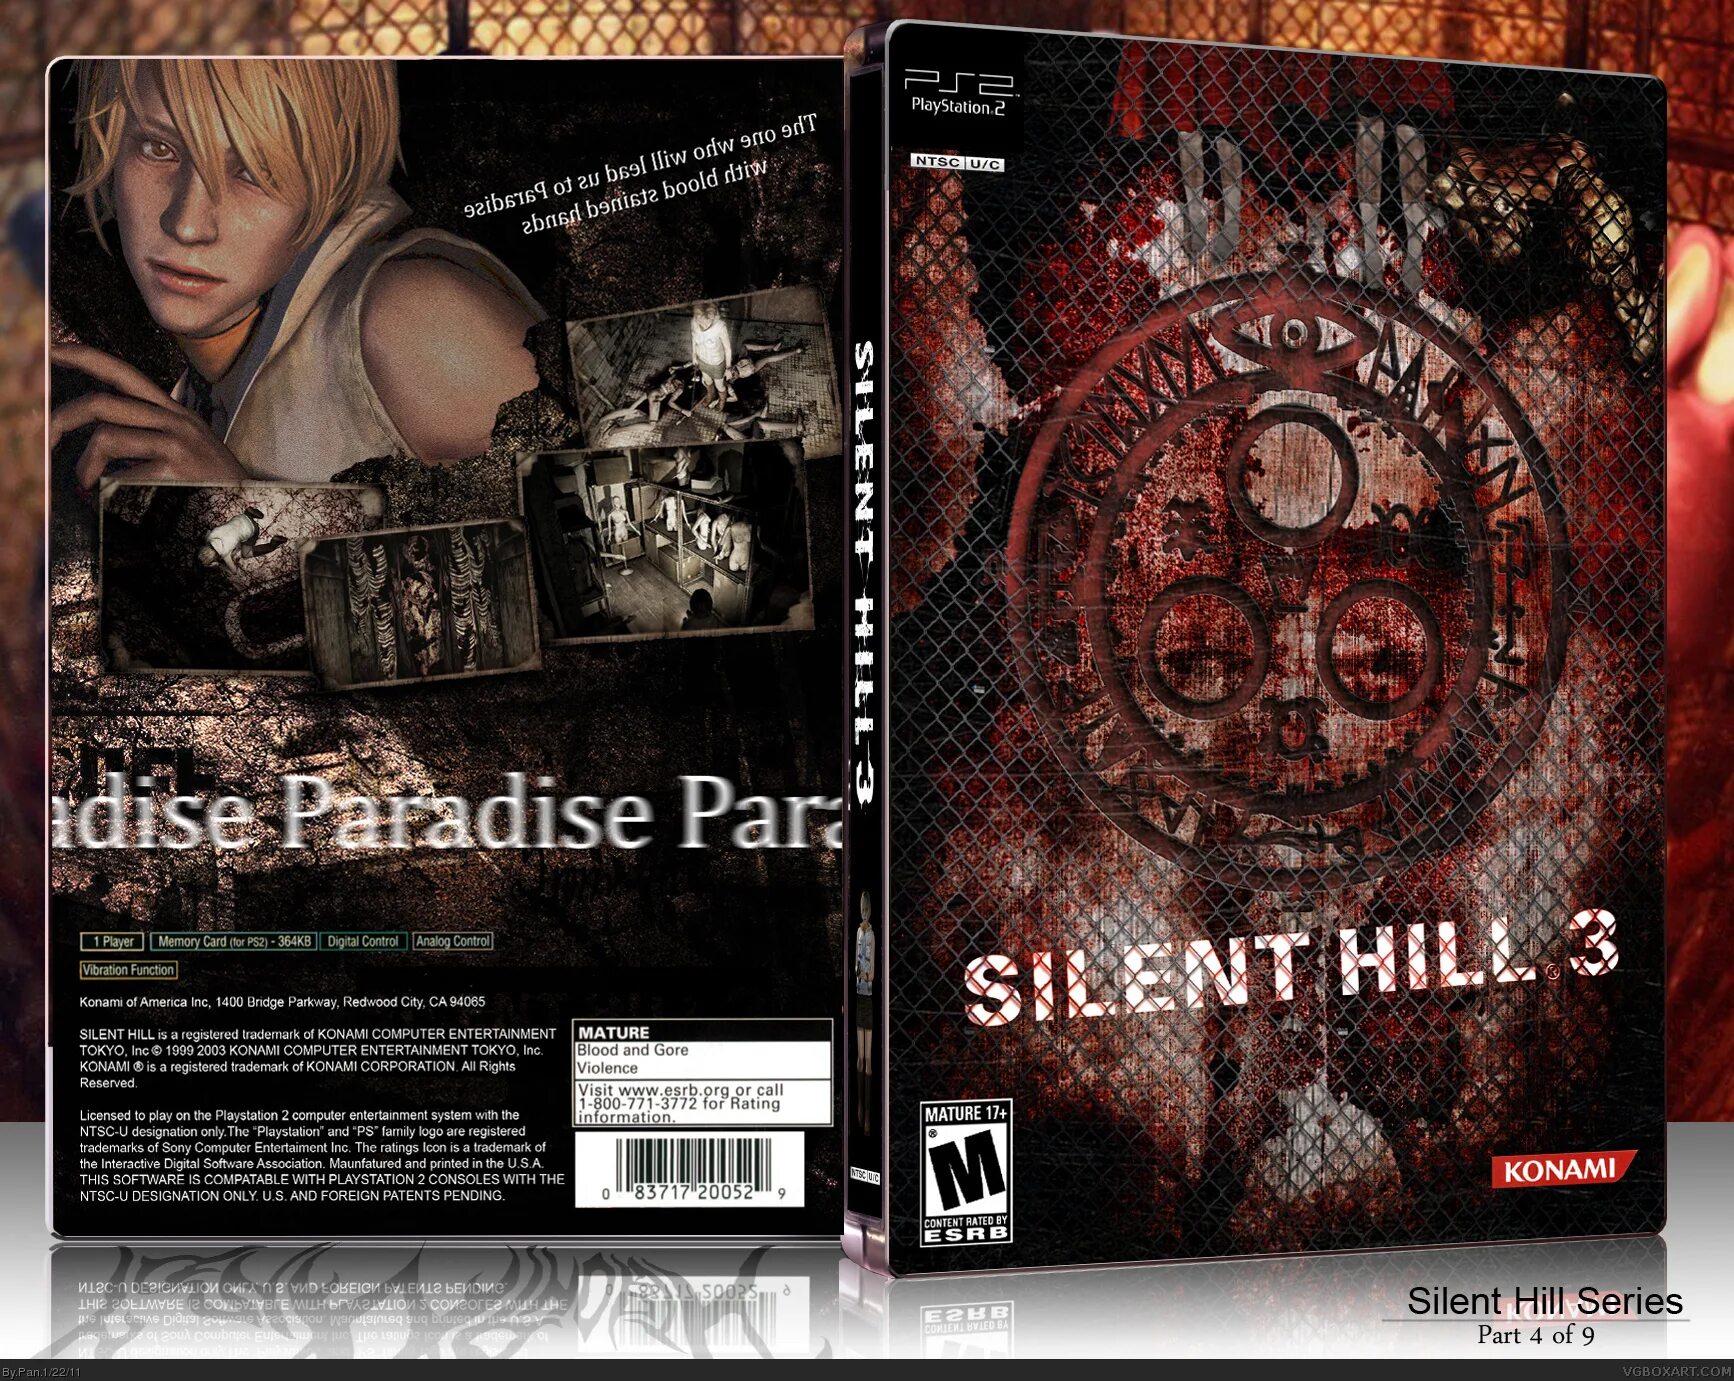 Silent Hill 3 ps2 Box Cover. Silent Hill 3 PLAYSTATION 2 обложка.